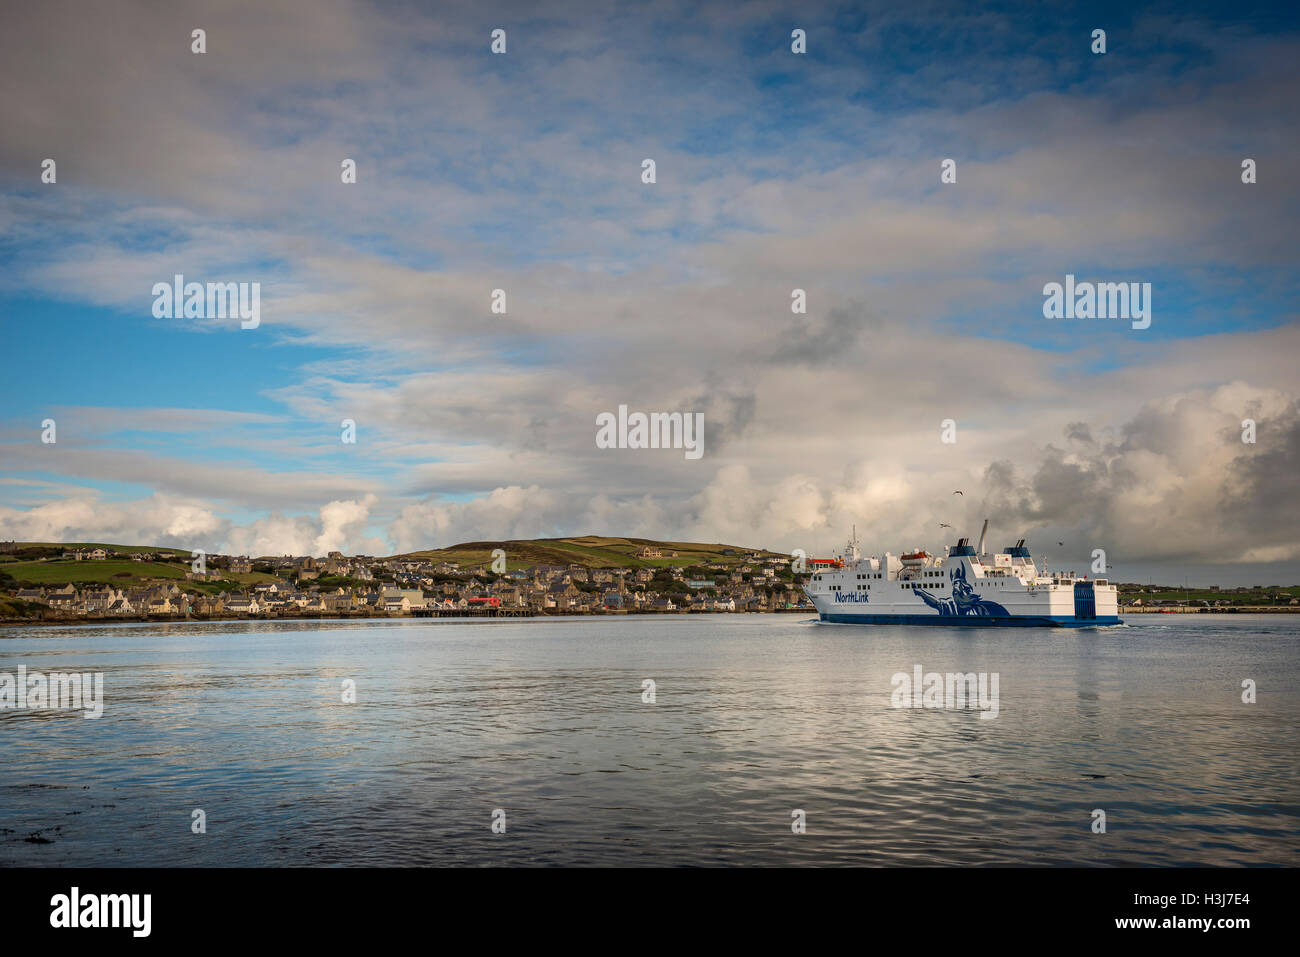 The Northlink Ferry Hamnavoe approaching the Port of Stromness on Mainland Orkney, Scotland, UK Stock Photo